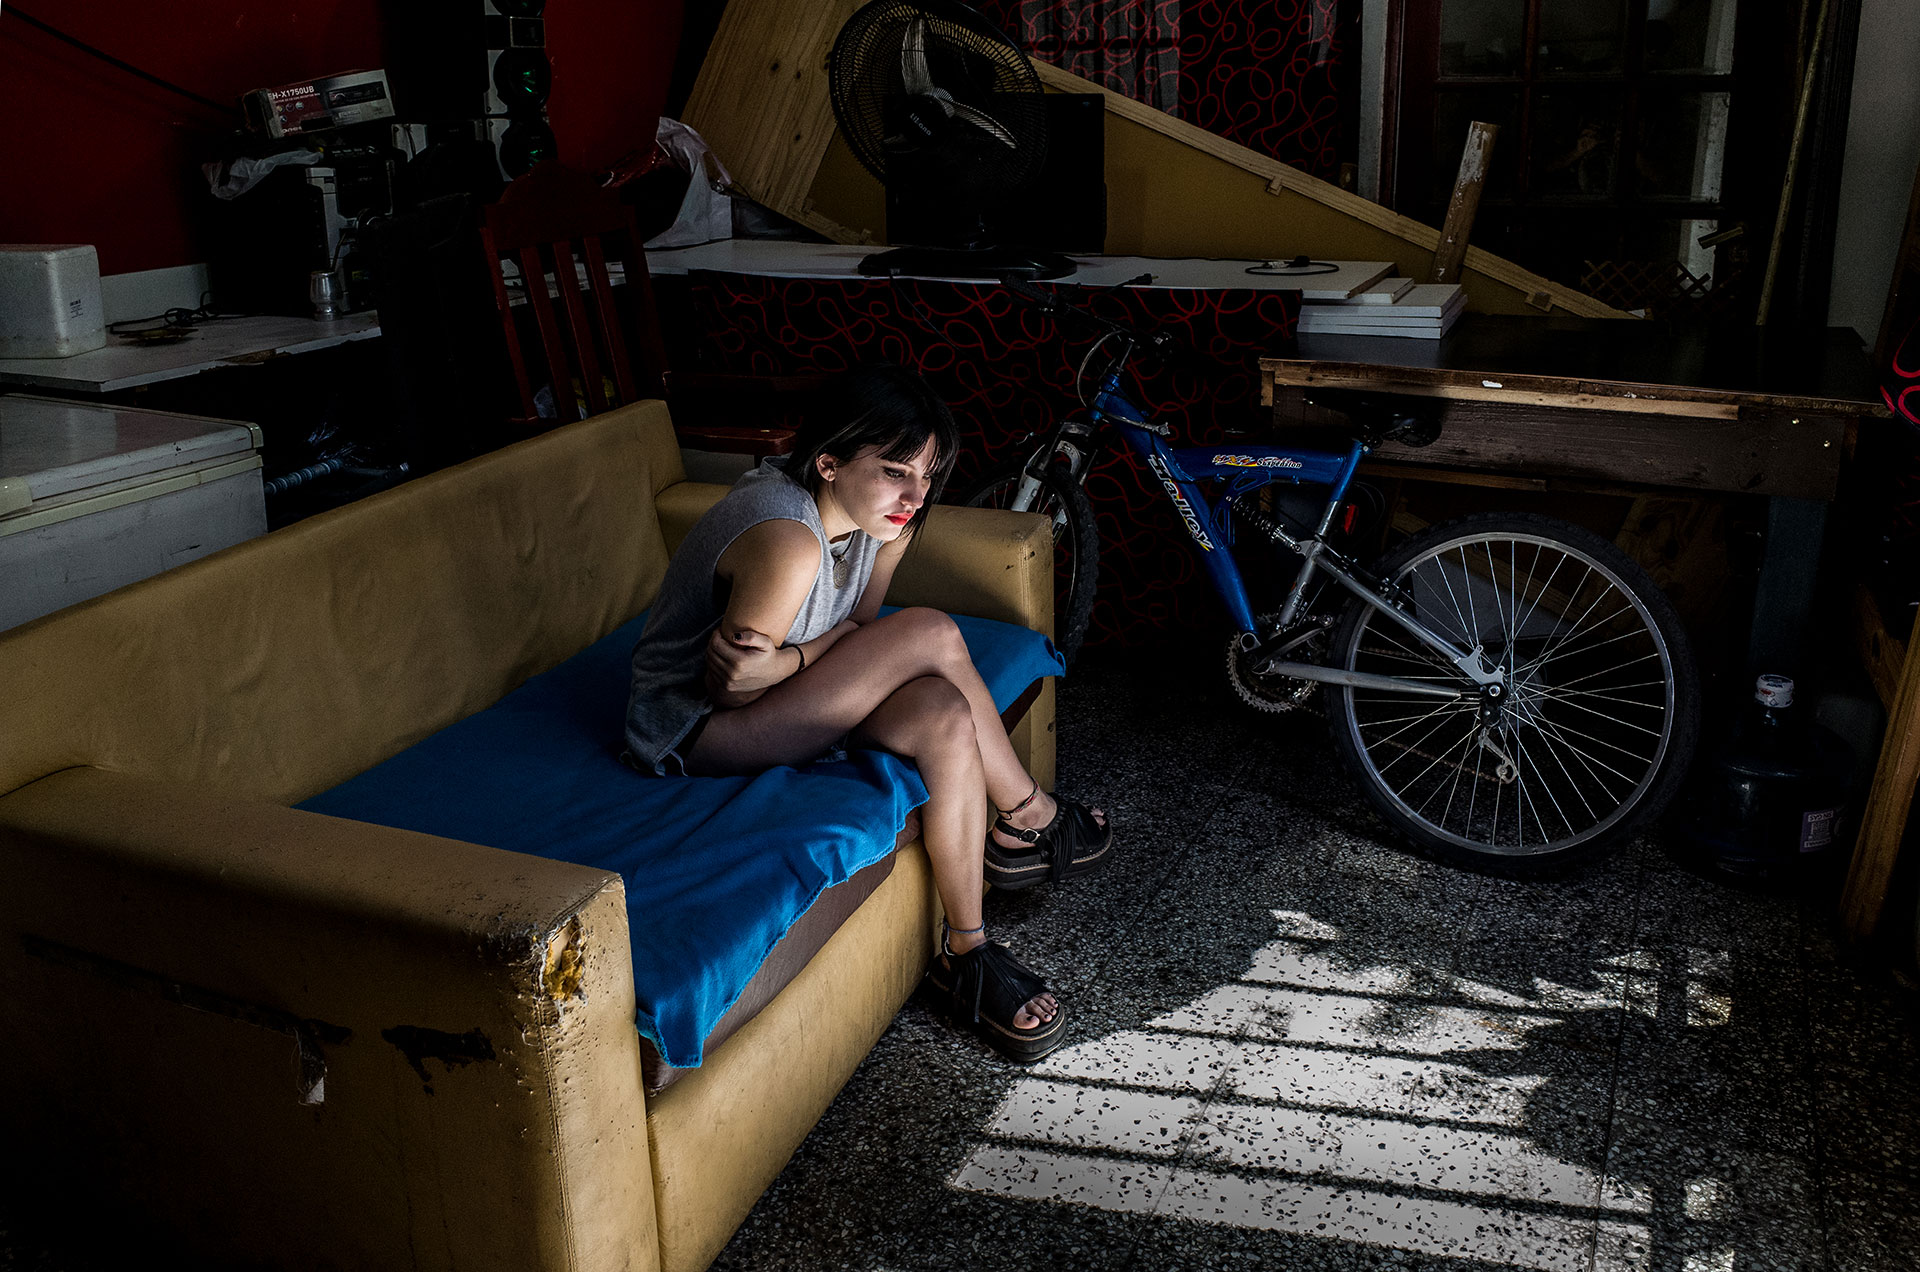 Belén Torres, 20 years, seated in the garage of her family house. She was victim of the “anesthetist” Gerardo Biliris, nicknamed for his profession and his way of torturing his victims. She was founded in a lake of blood. The Police discovered that he abused of many girls using mix of drugs and sedatives.